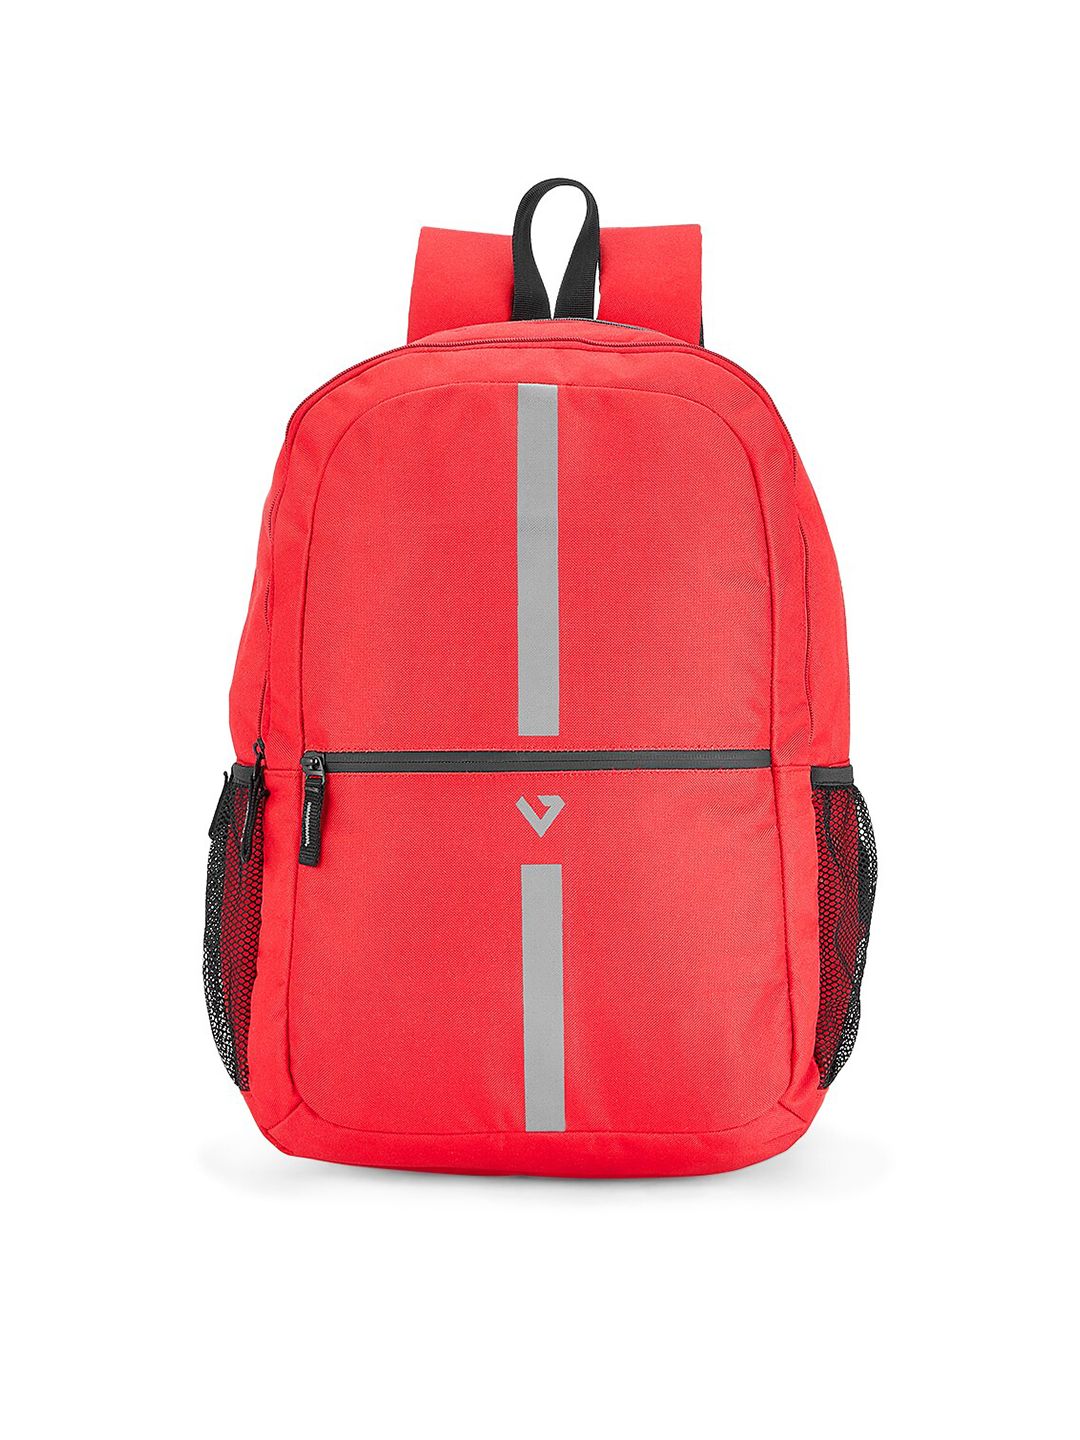 THe VerTicaL Unisex Red & Black Brand Logo Backpack Price in India